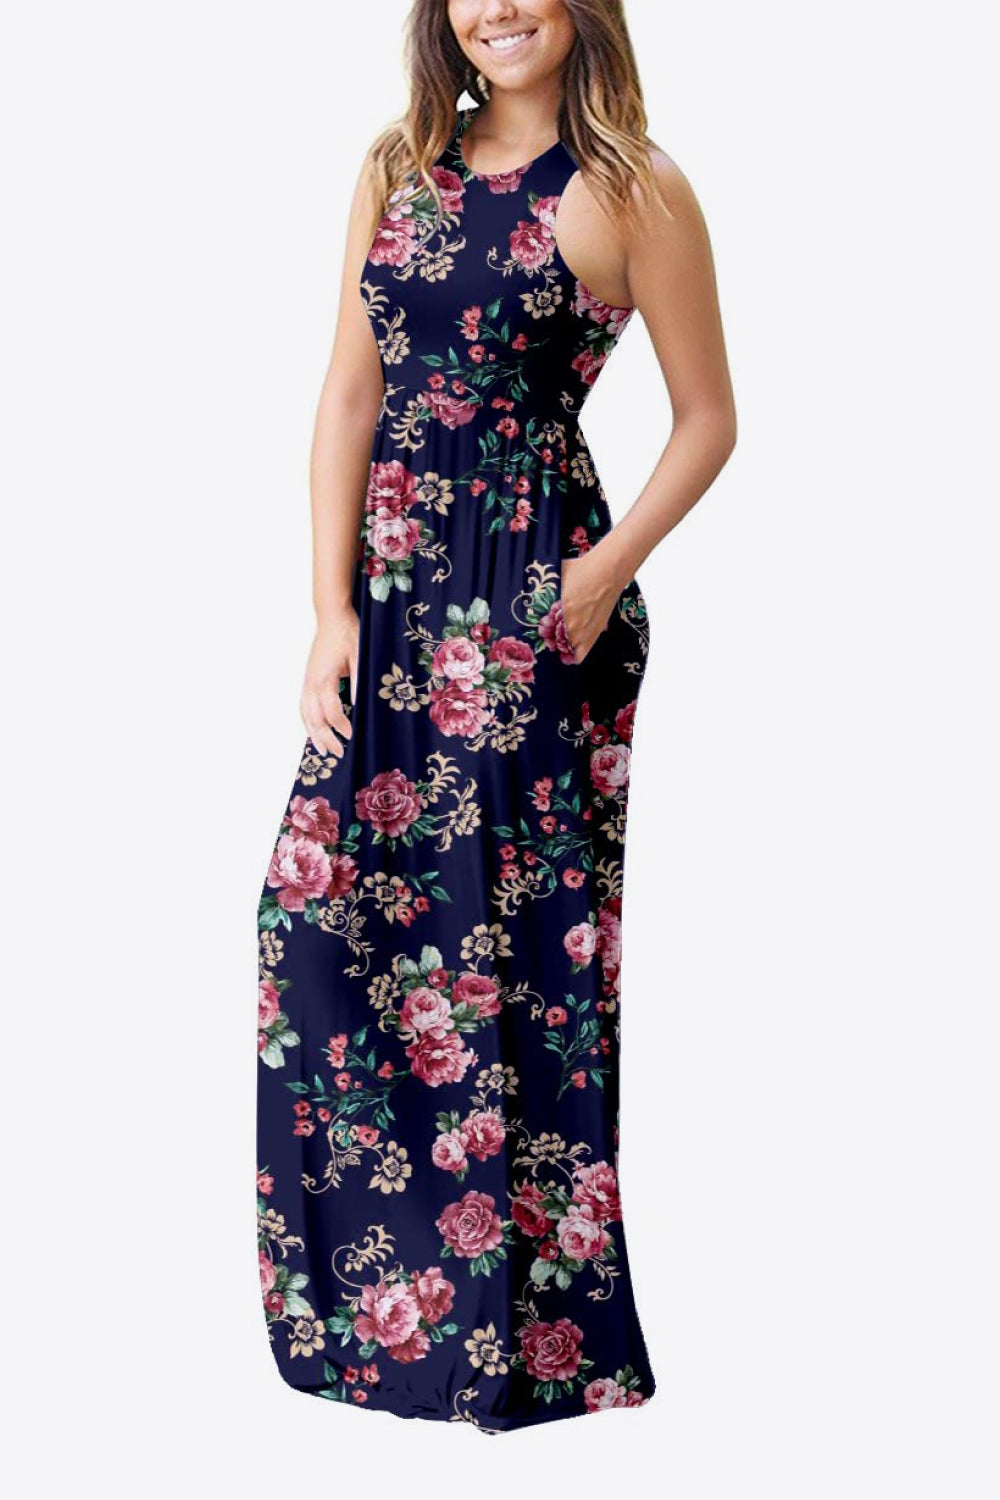 Empire Waist Sleeveless Dress with Pockets - Online Only